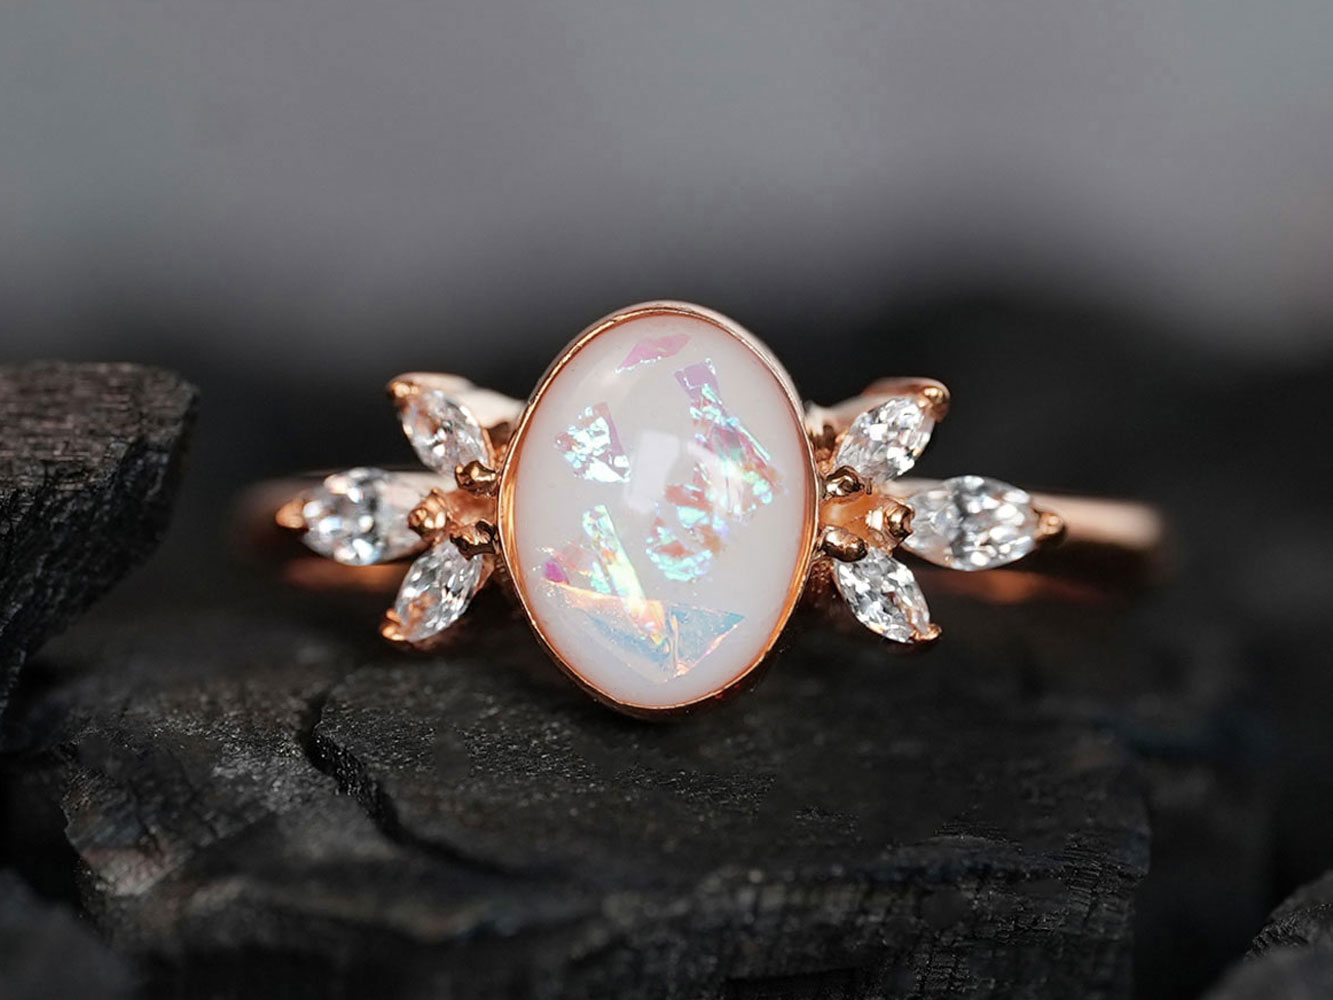 breastmilk ring burst of love oval with crystals from KeepsakeMom with opal effect flakes